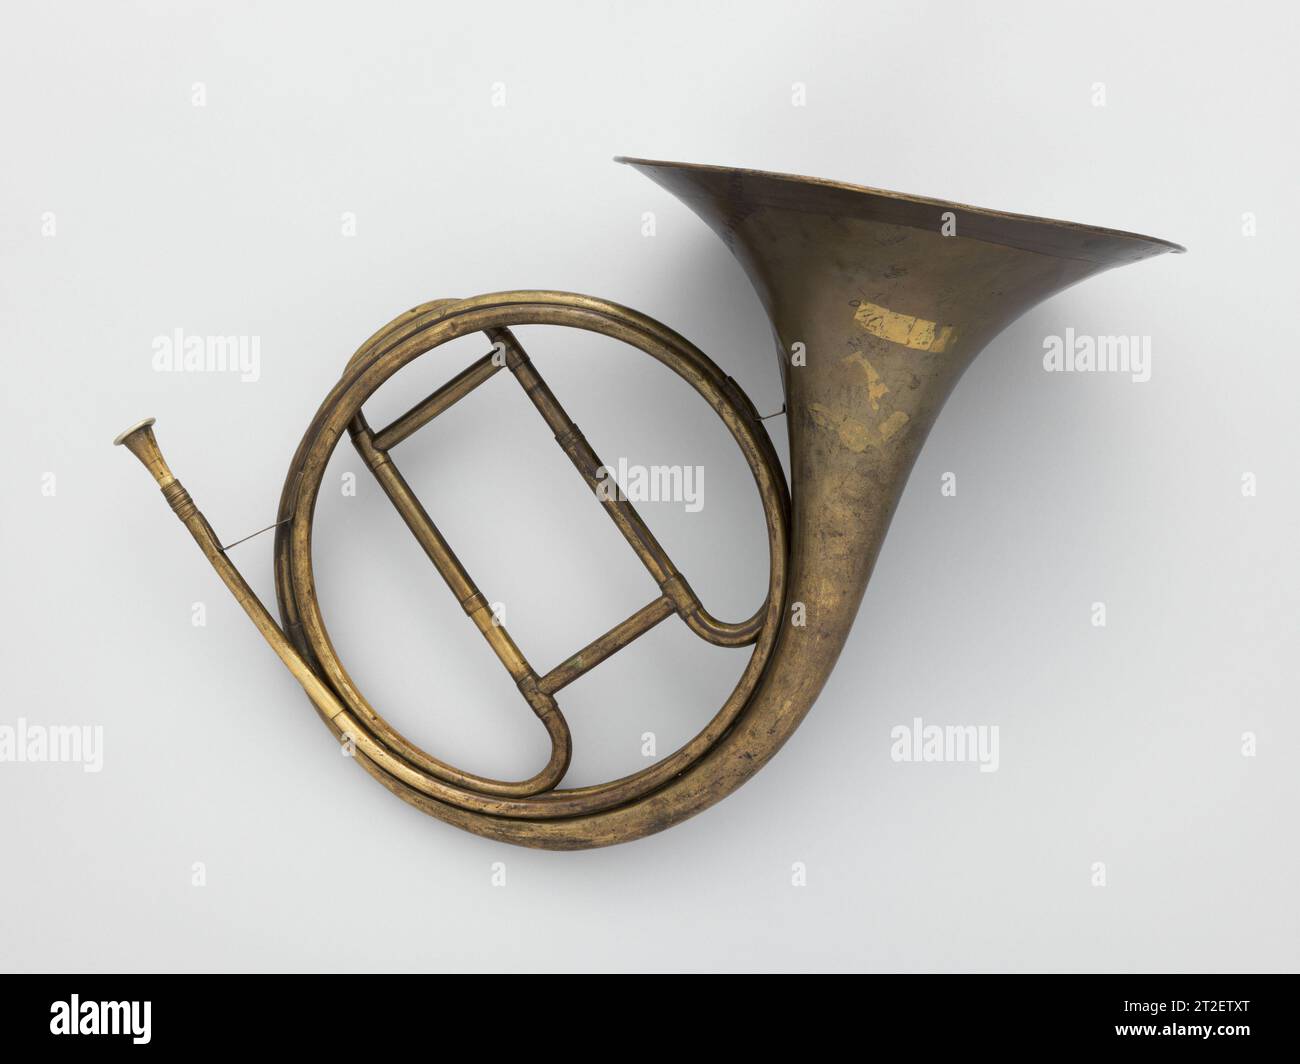 Orchestral Horn Unknown ca. 1830 View more. Orchestral Horn. German. ca. 1830. brass. Markneukirchen or vicinity, Germany. Aerophone-Lip Vibrated-horn Stock Photo